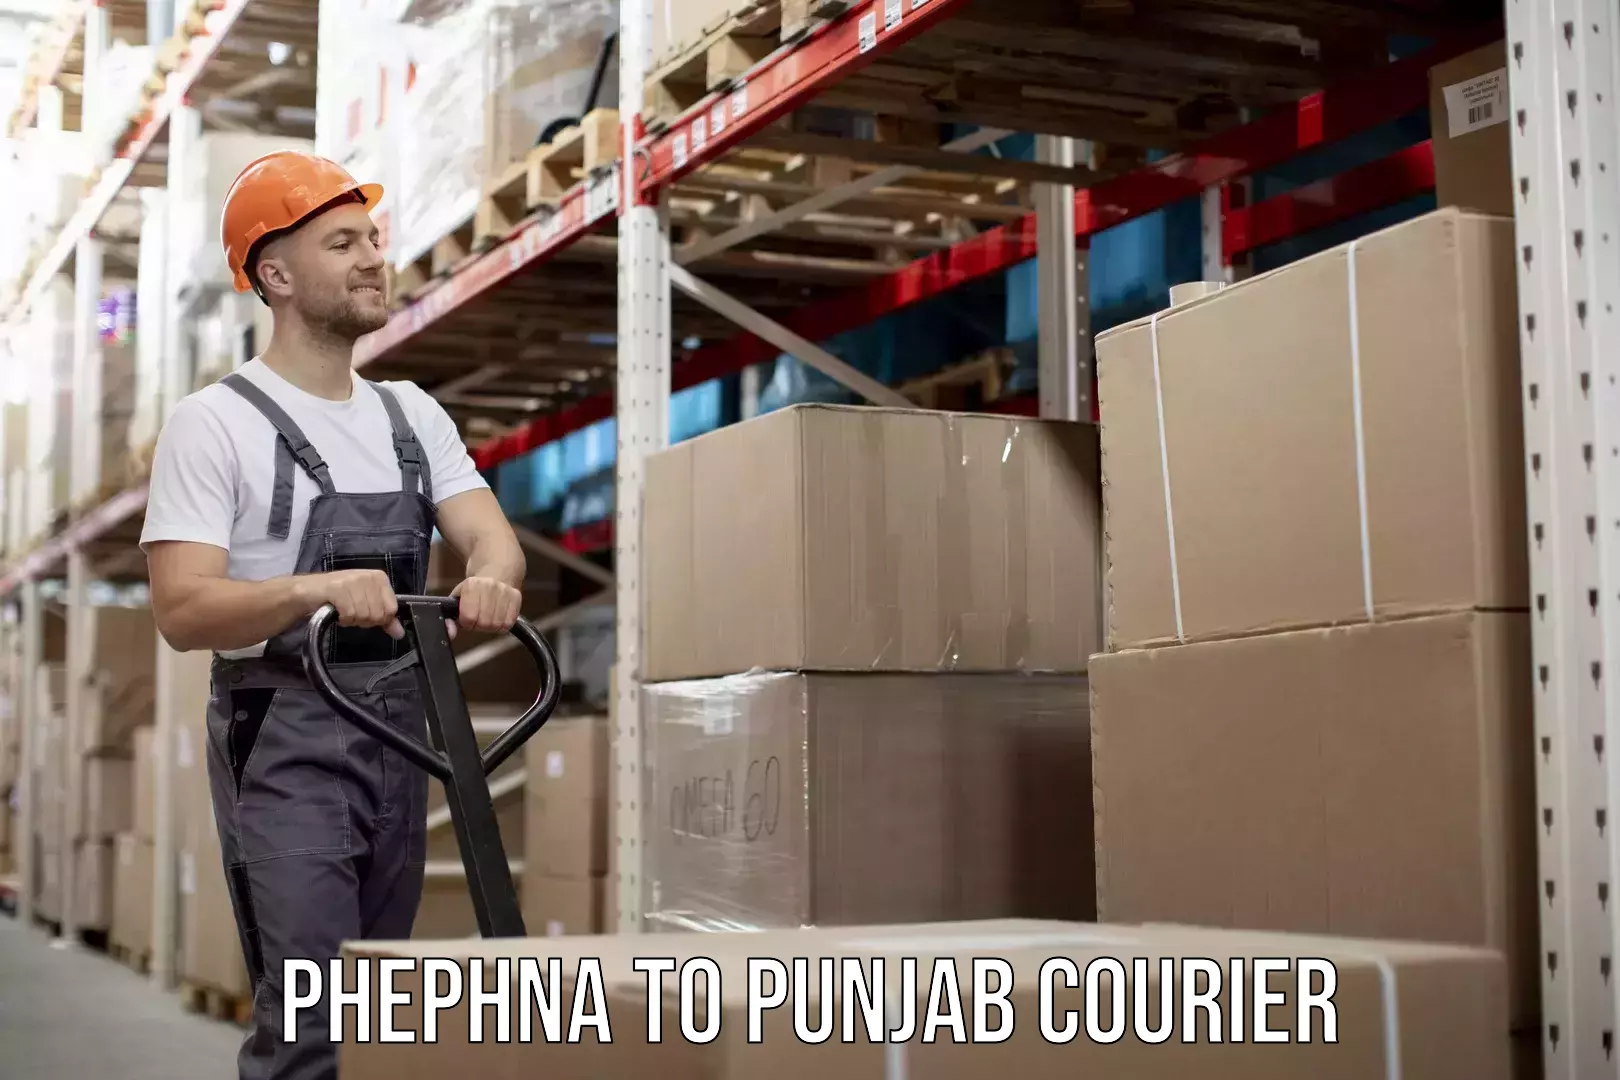 Efficient packing and moving Phephna to Punjab